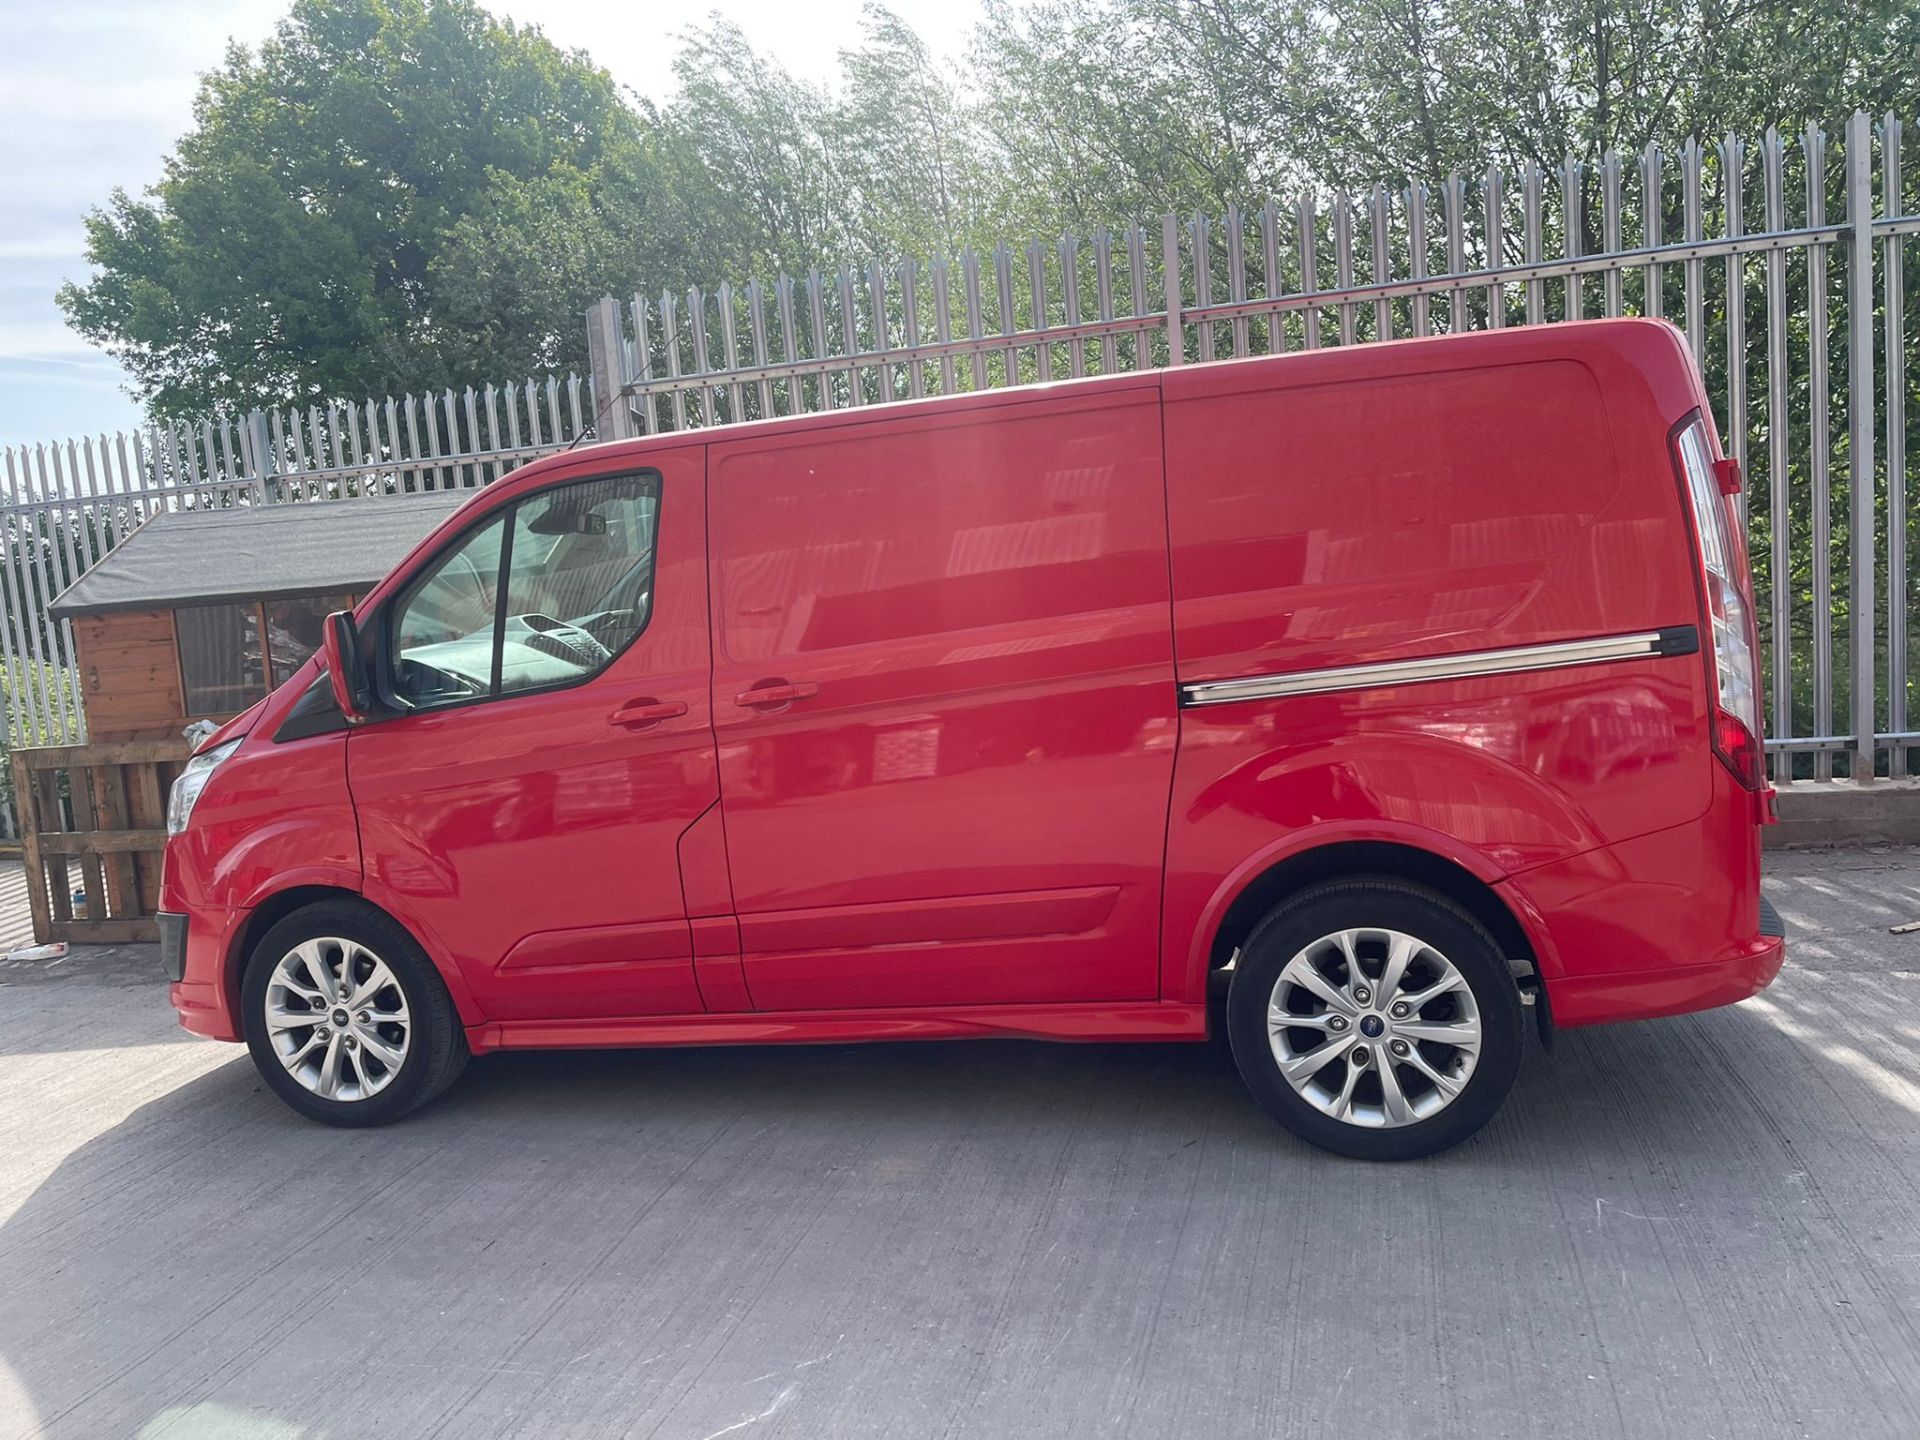 YT17 WJJ - FORD TRANSIT CUSTOM 290 L1 DIESEL FWD - 2.0 TDCi 170ps Low Roof Limited Van   Colour: Red - Image 2 of 7